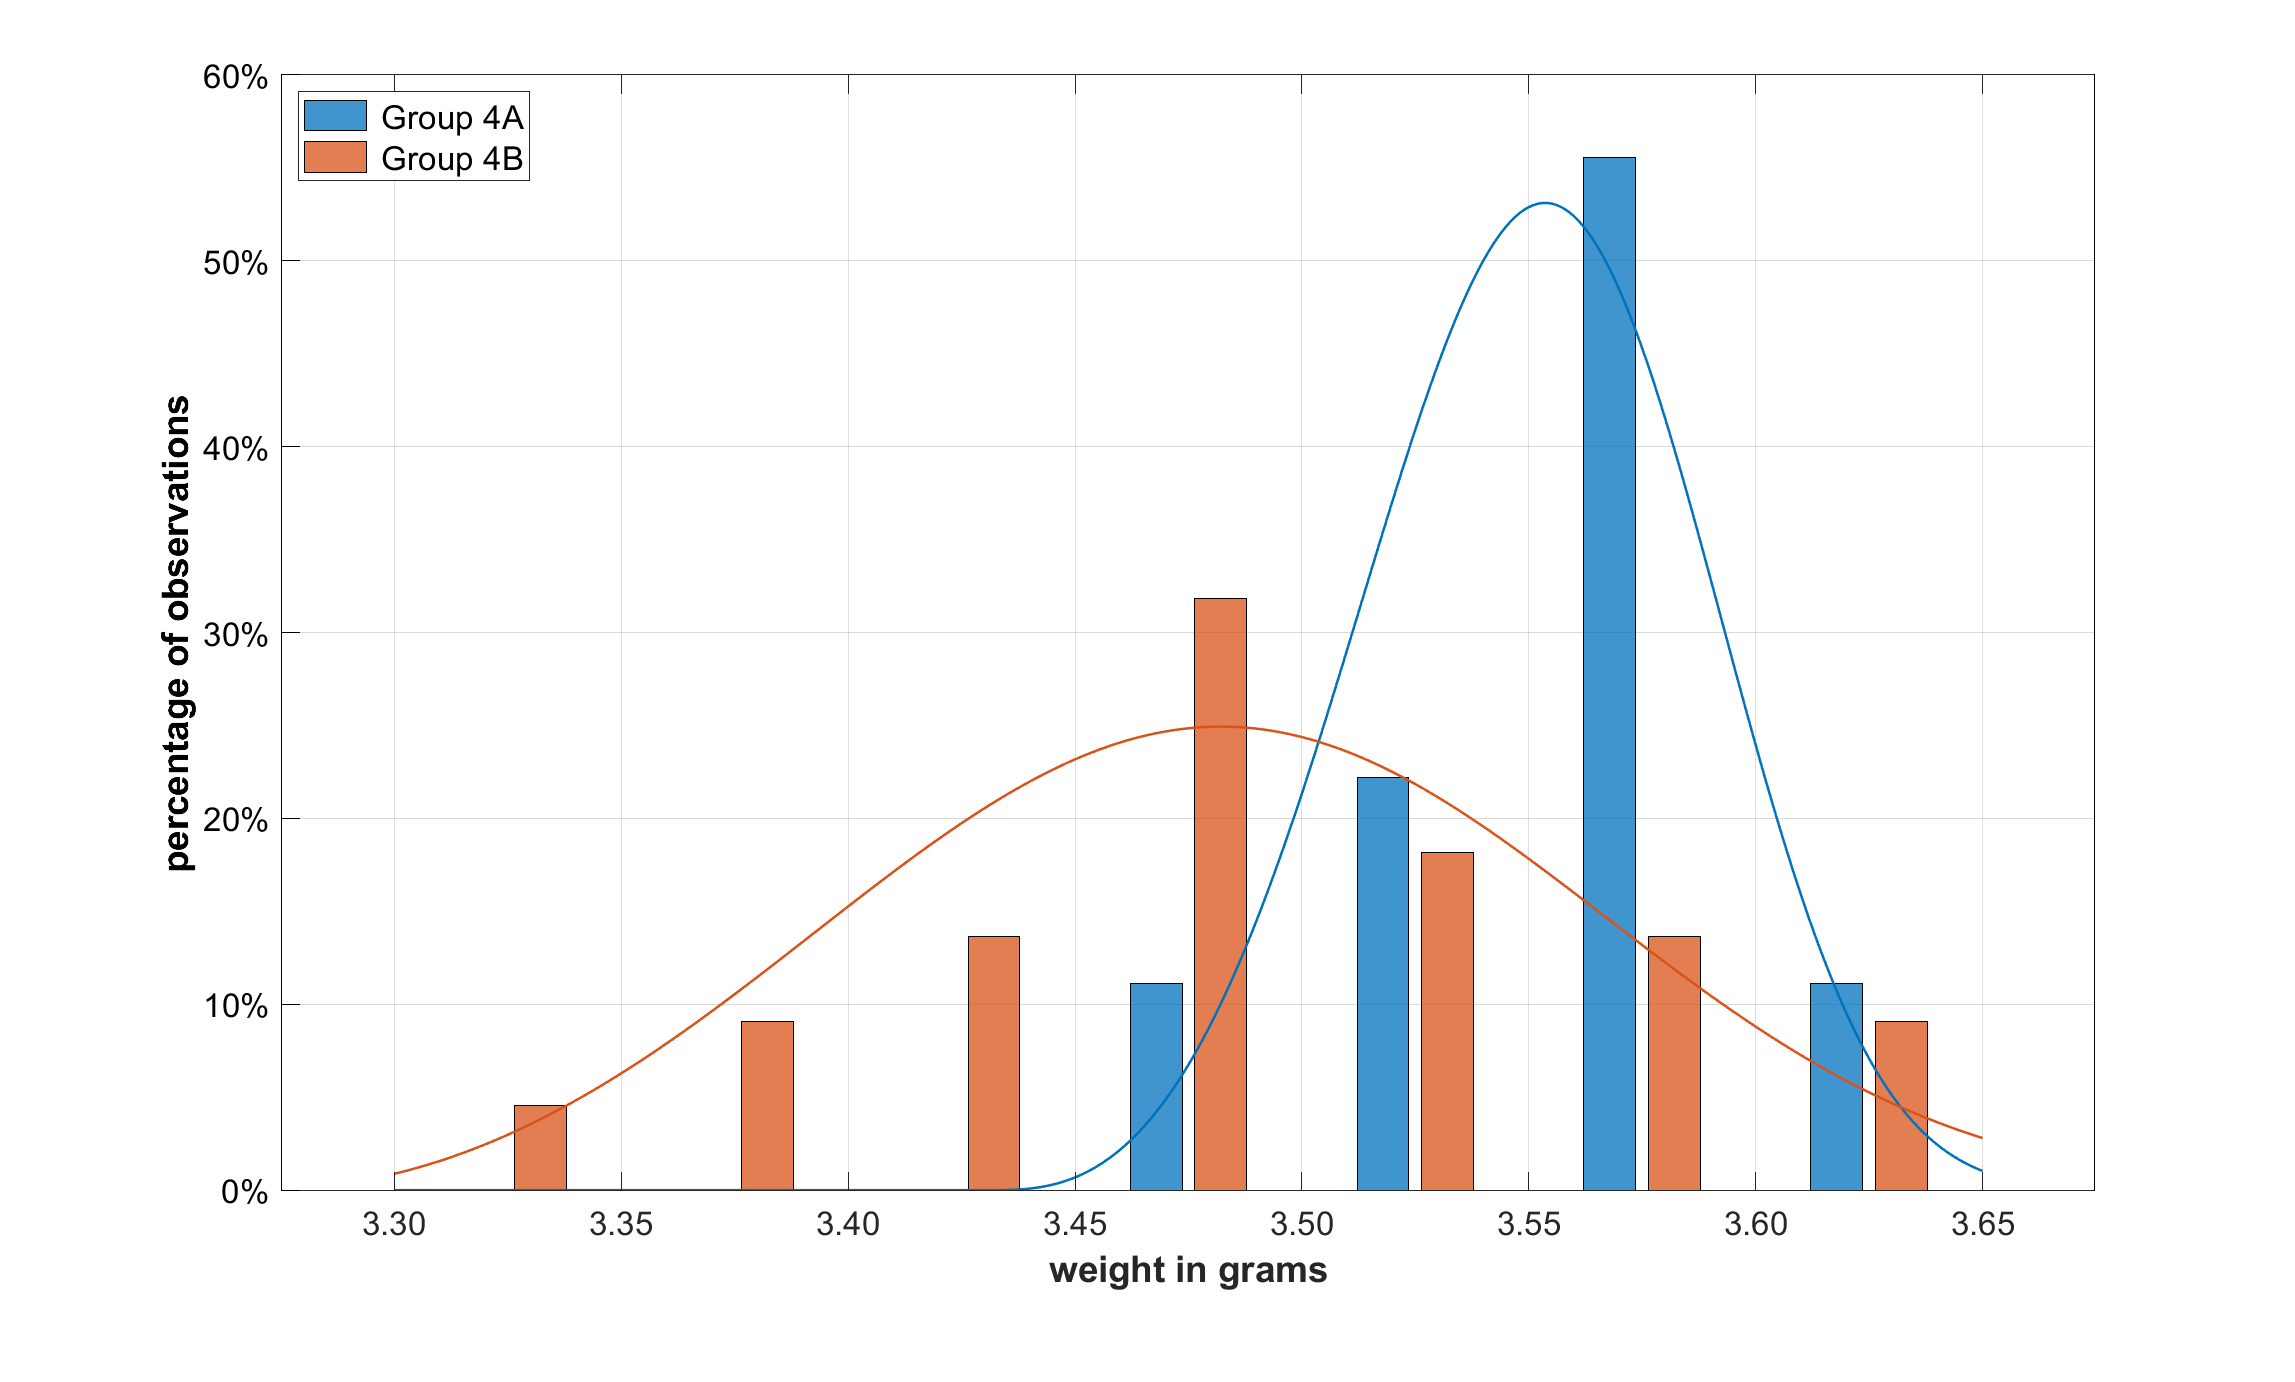 Figure 3: Relative frequency histograms of Groups 4A and 4B